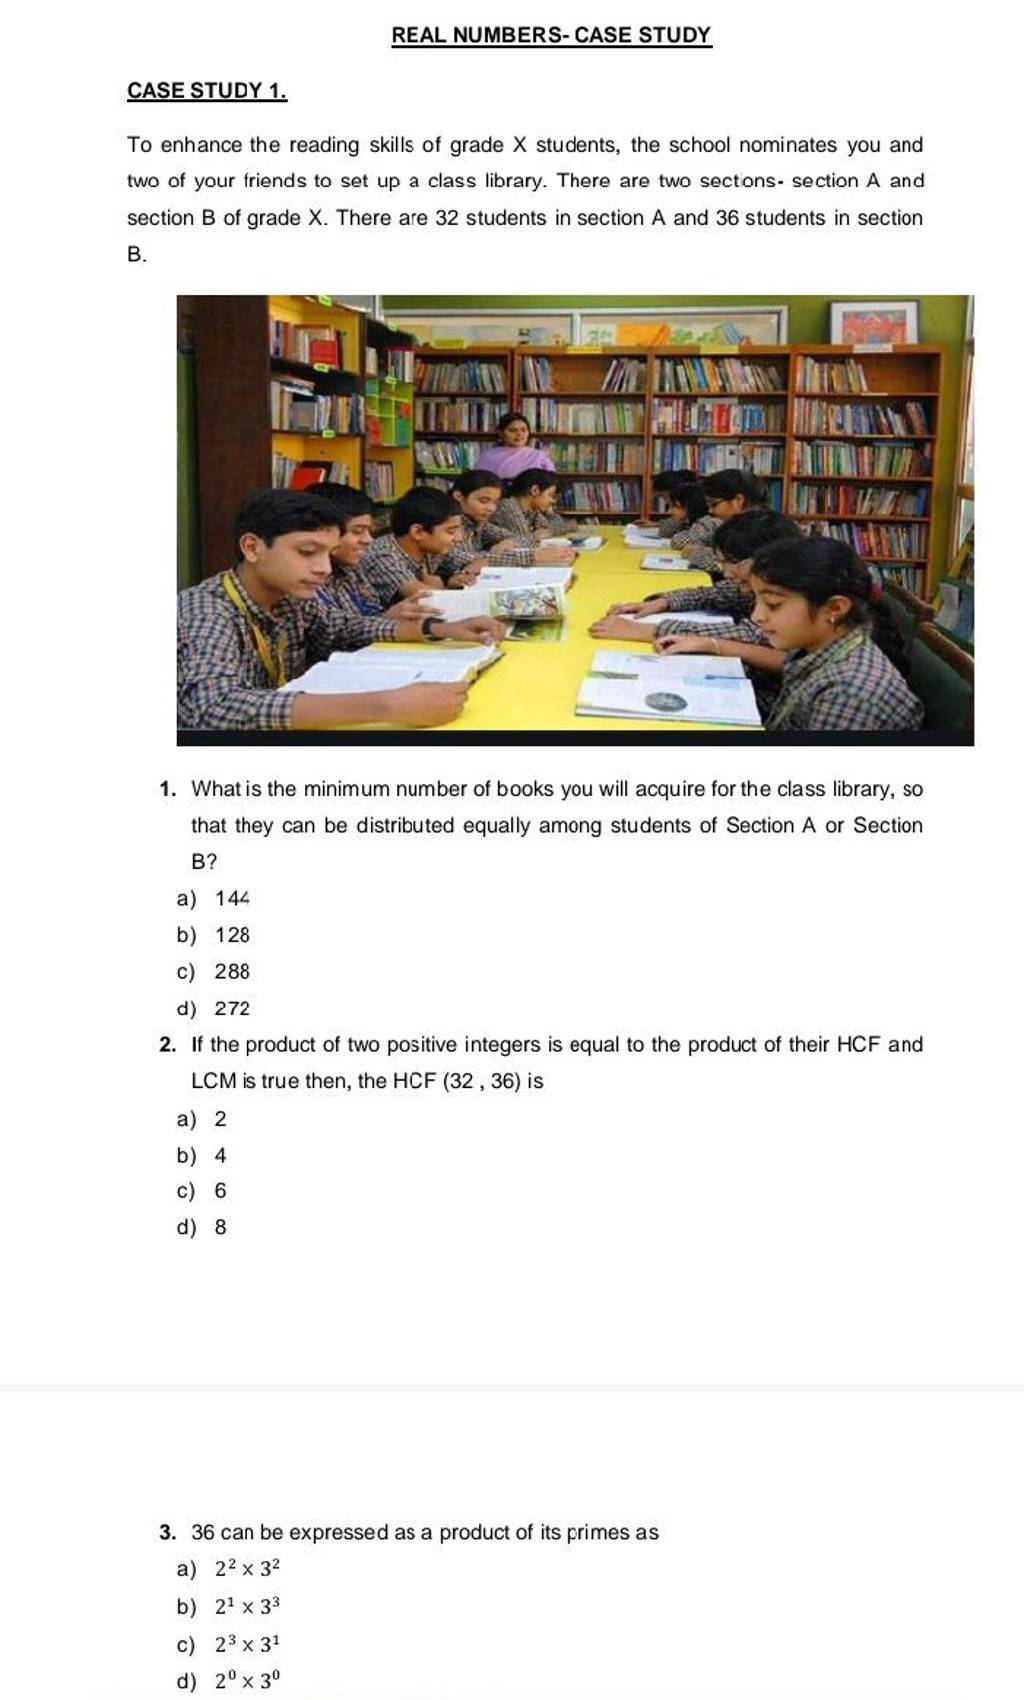 case study questions of real numbers class 10